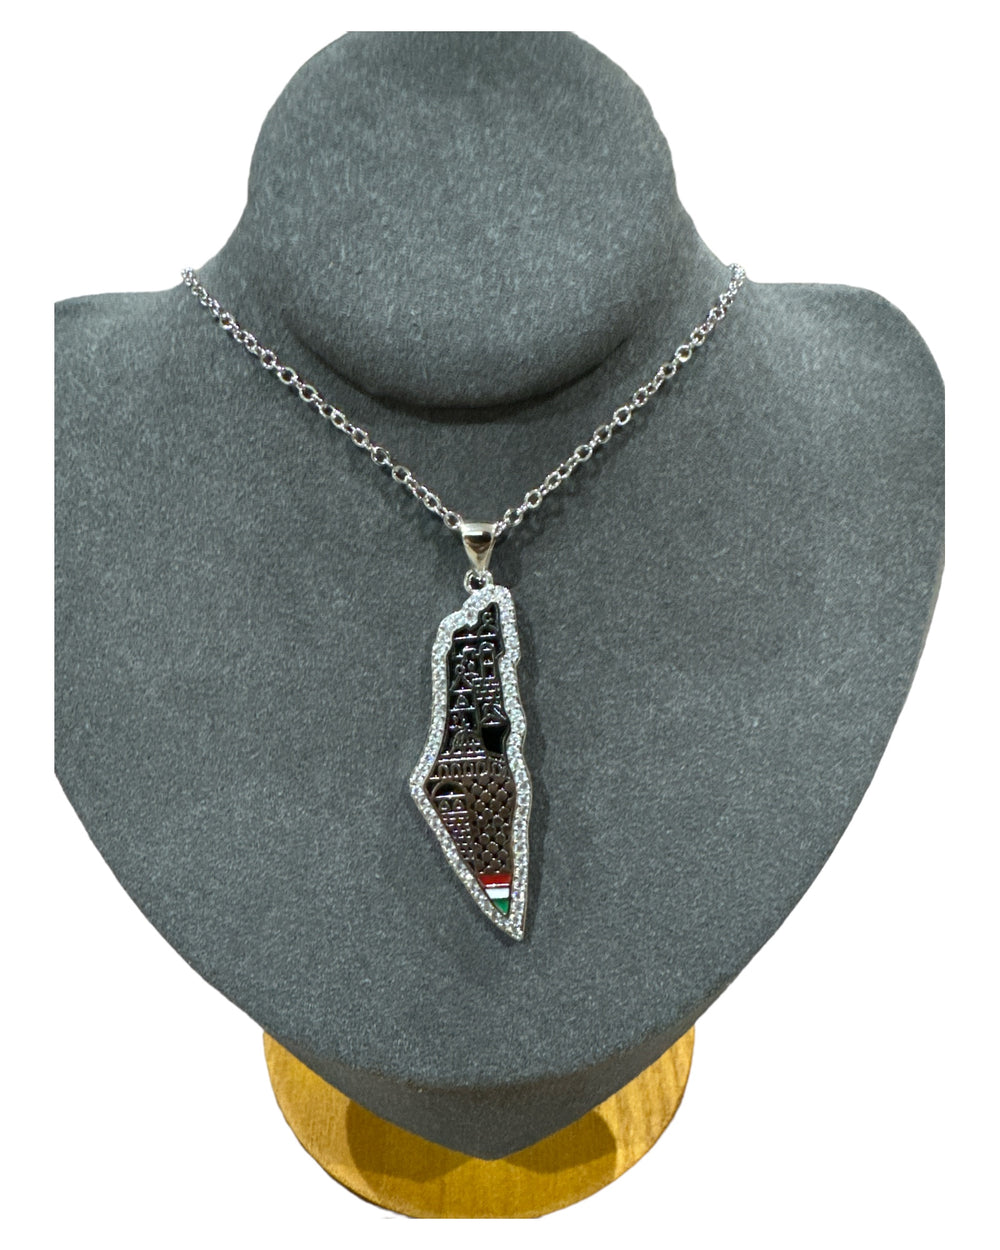 Landmarks of Pride: Stainless Steel Palestine Map Necklace with Iconic Places & Crystal Border